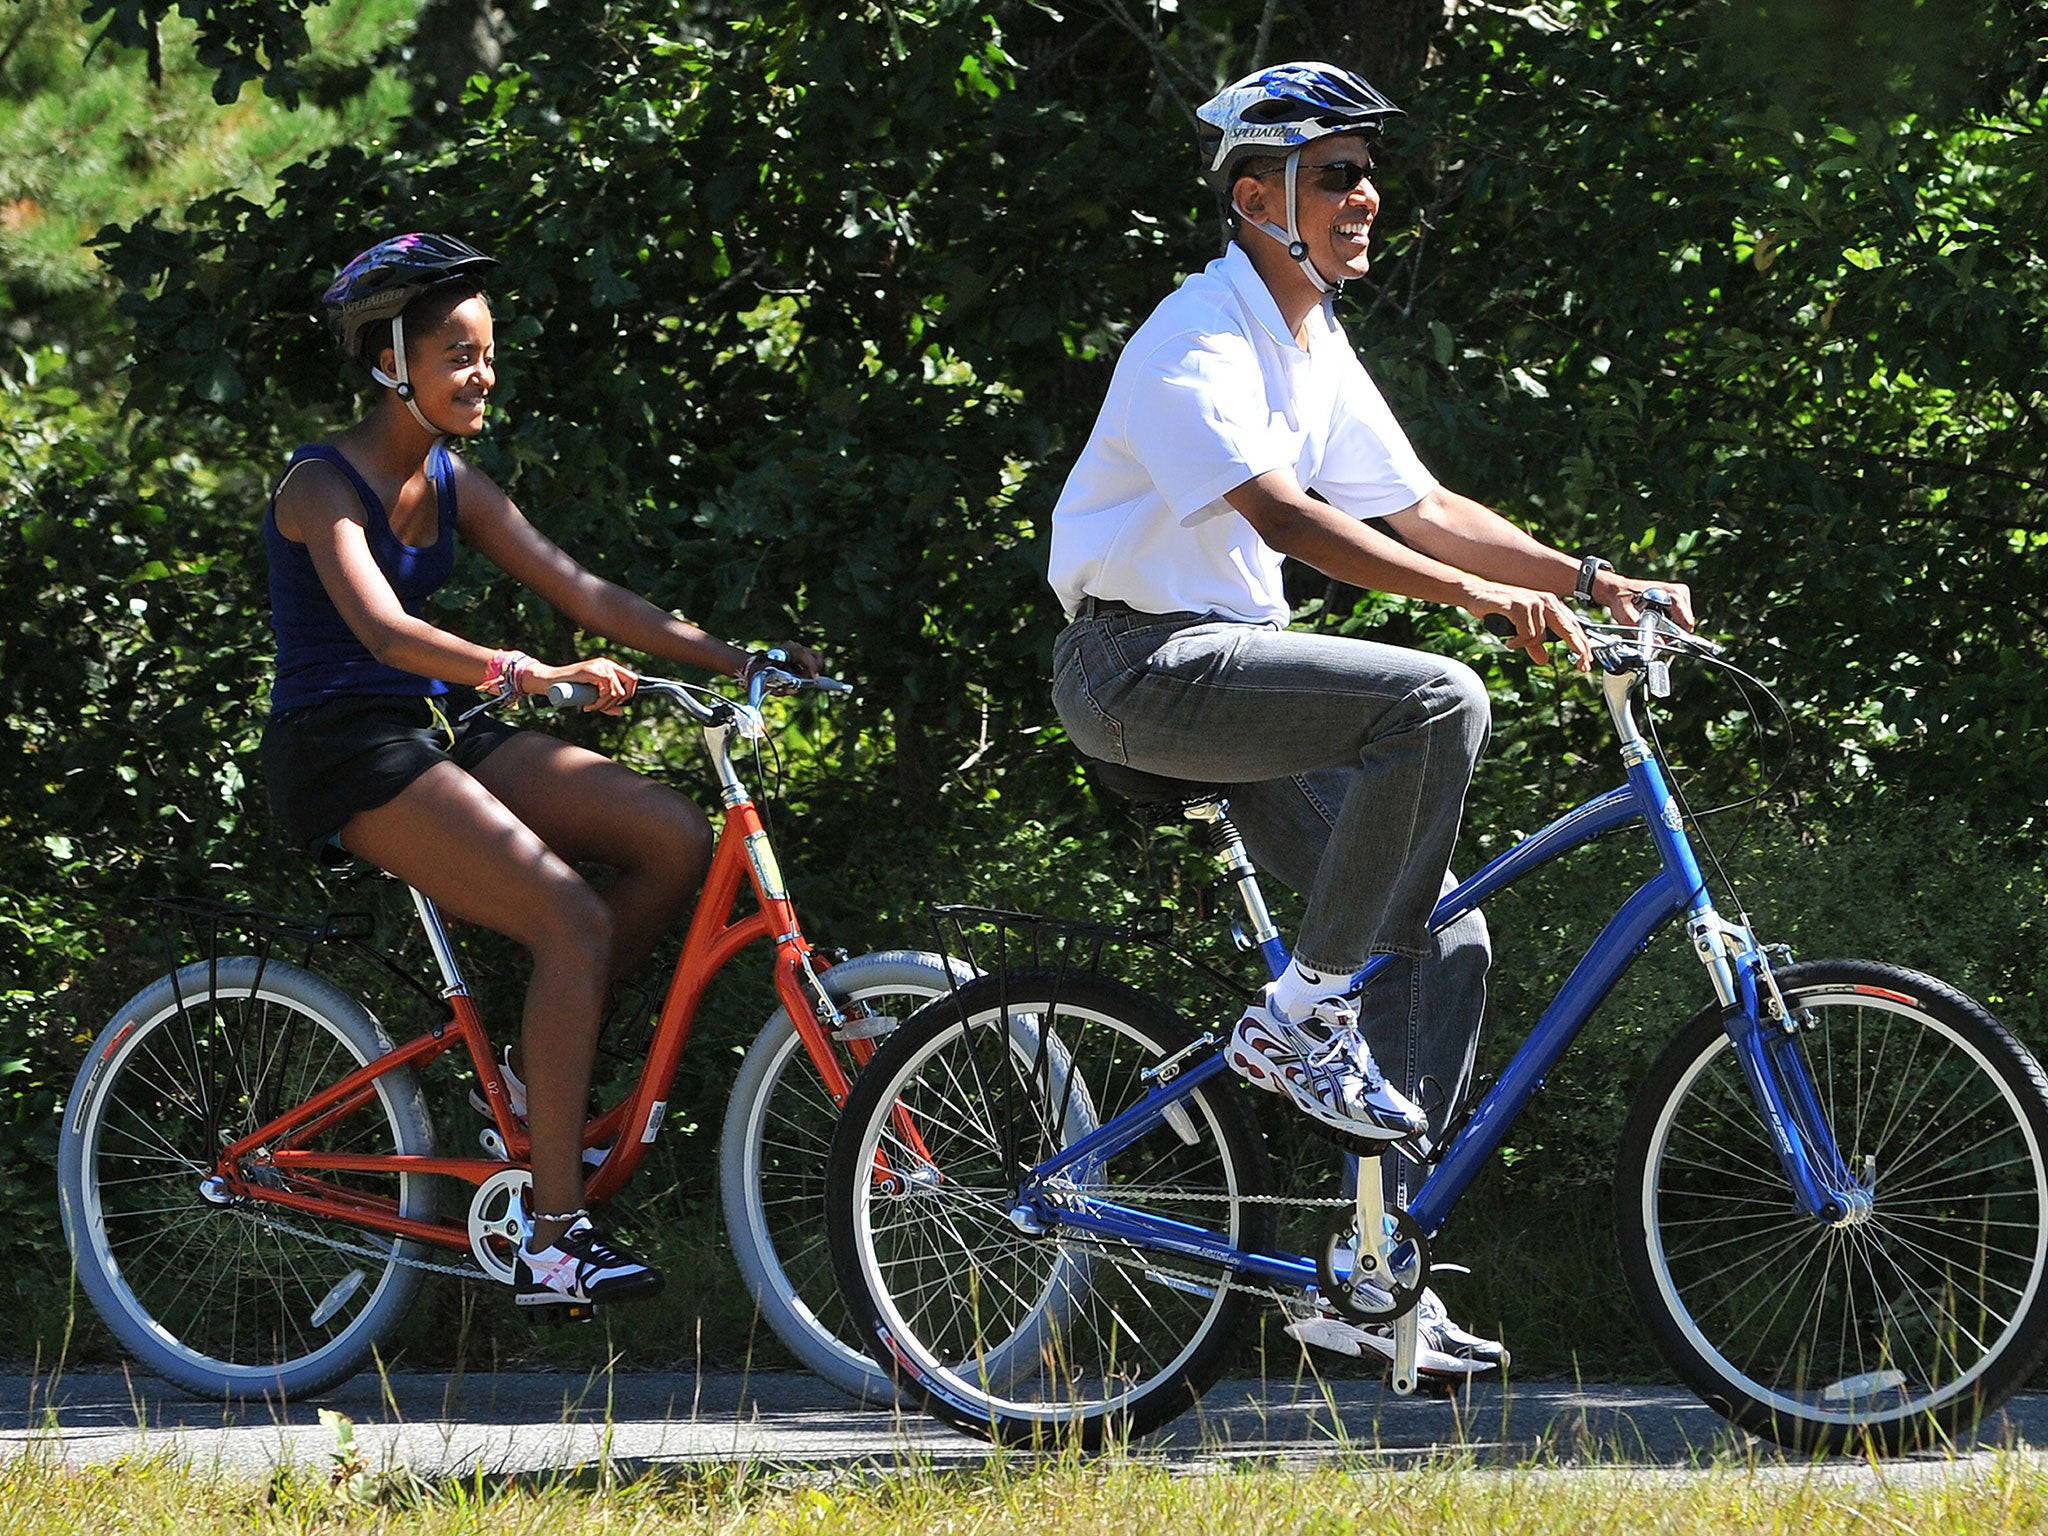 Barack Obama rides his bicycle with daughter Malia on Martha's Vineyard on 2010